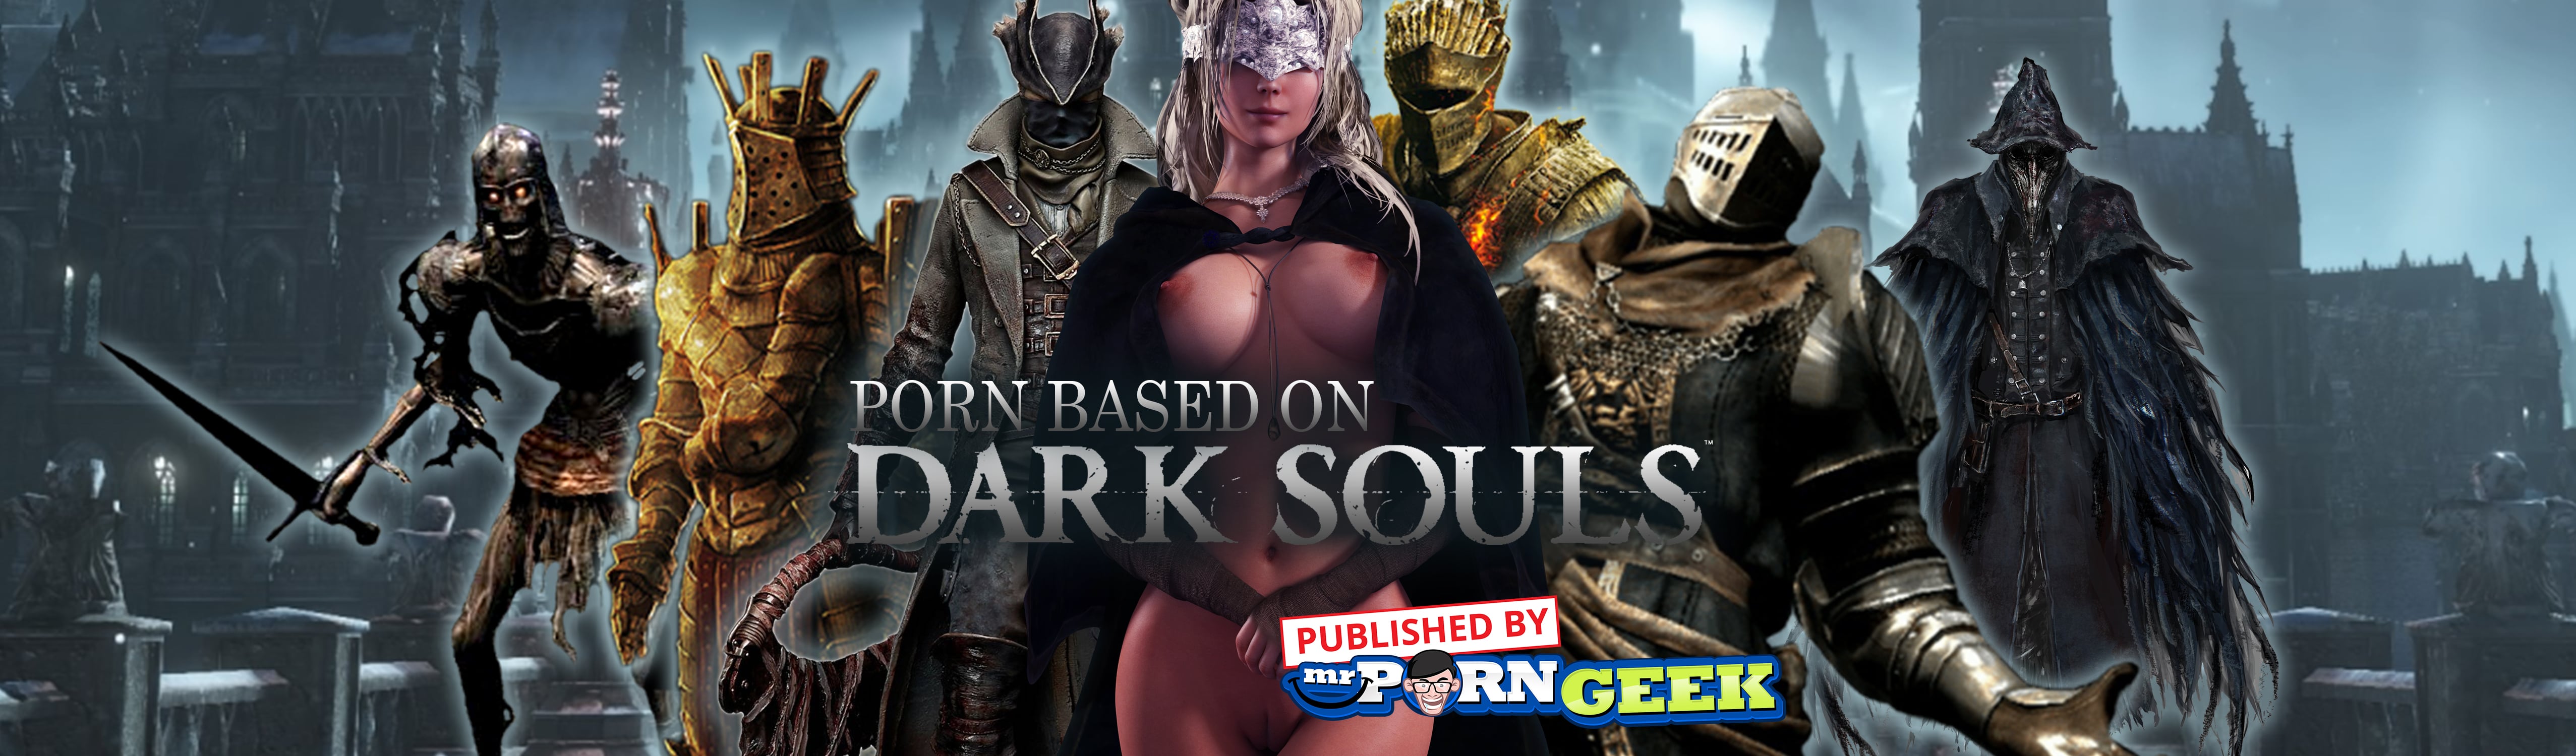 Twinkle T. reccomend sexy dark souls action